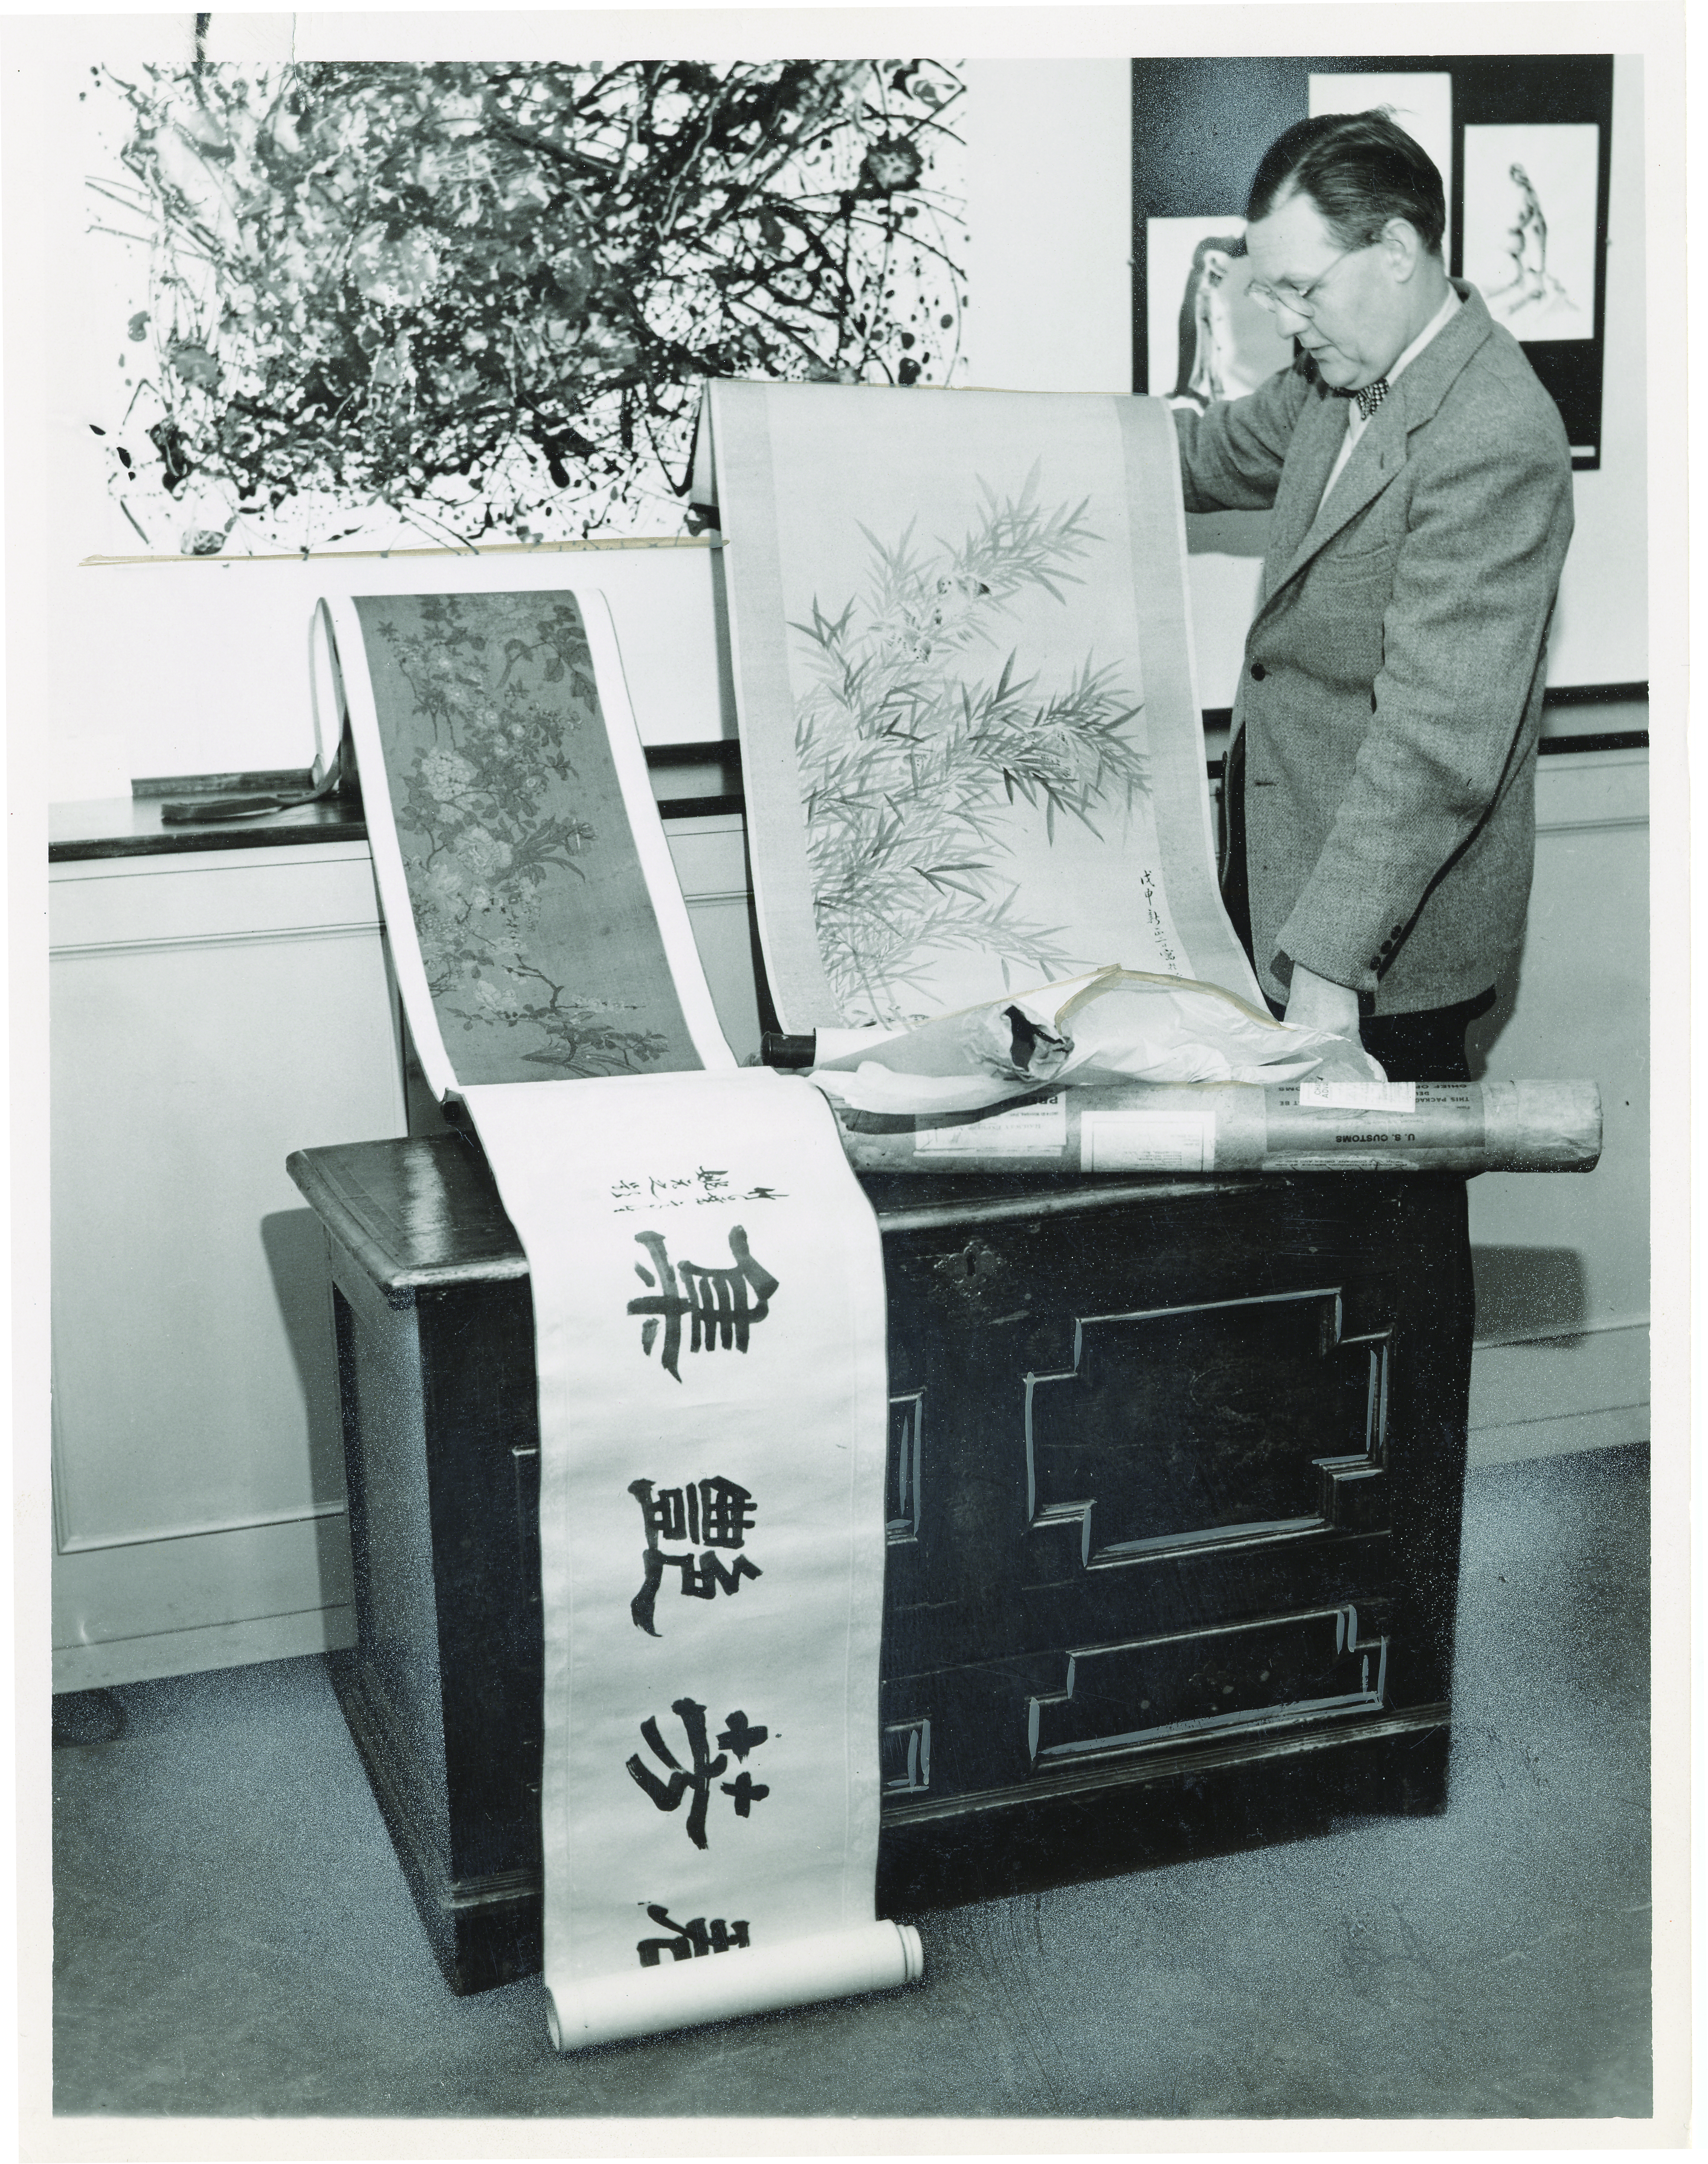 S. Lane Faison, director of the [[Williams College Museum of Art]] from 1948 to 1976.